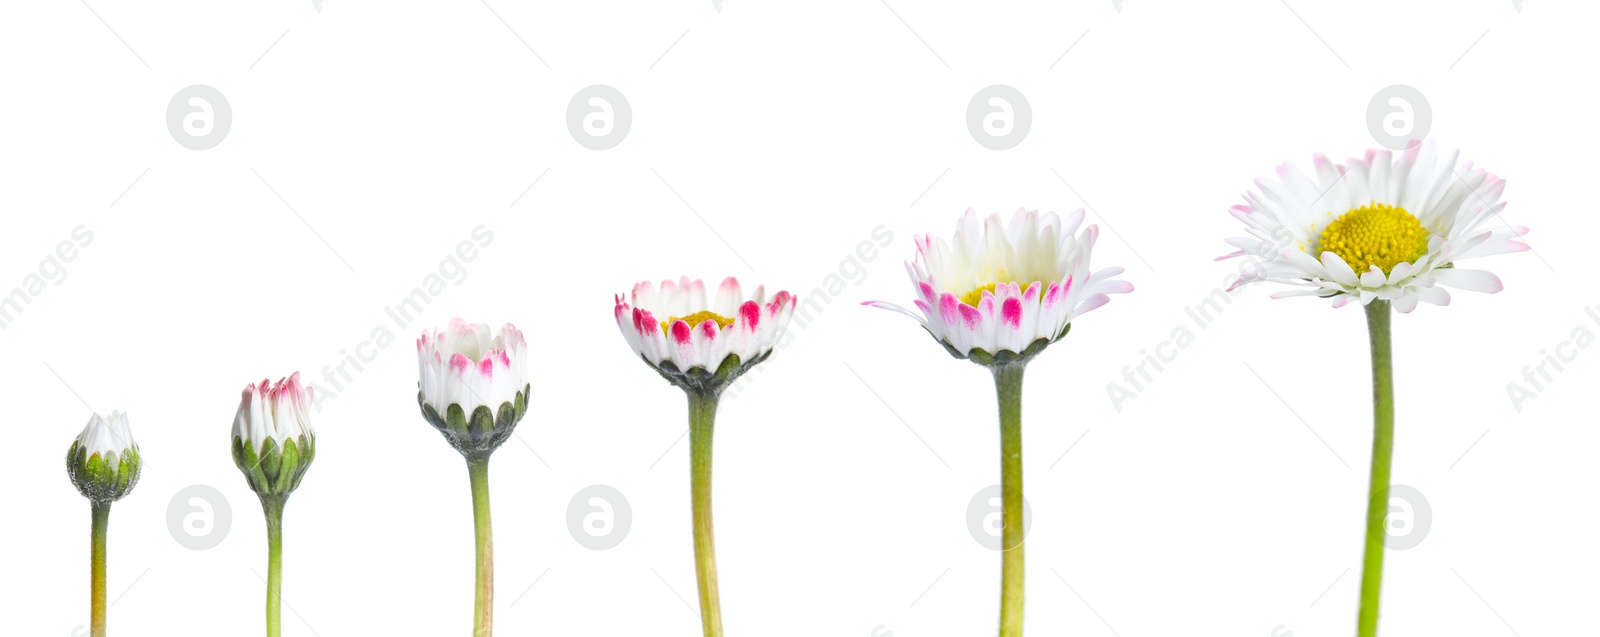 Image of Blooming stages of beautiful daisy flower on white background